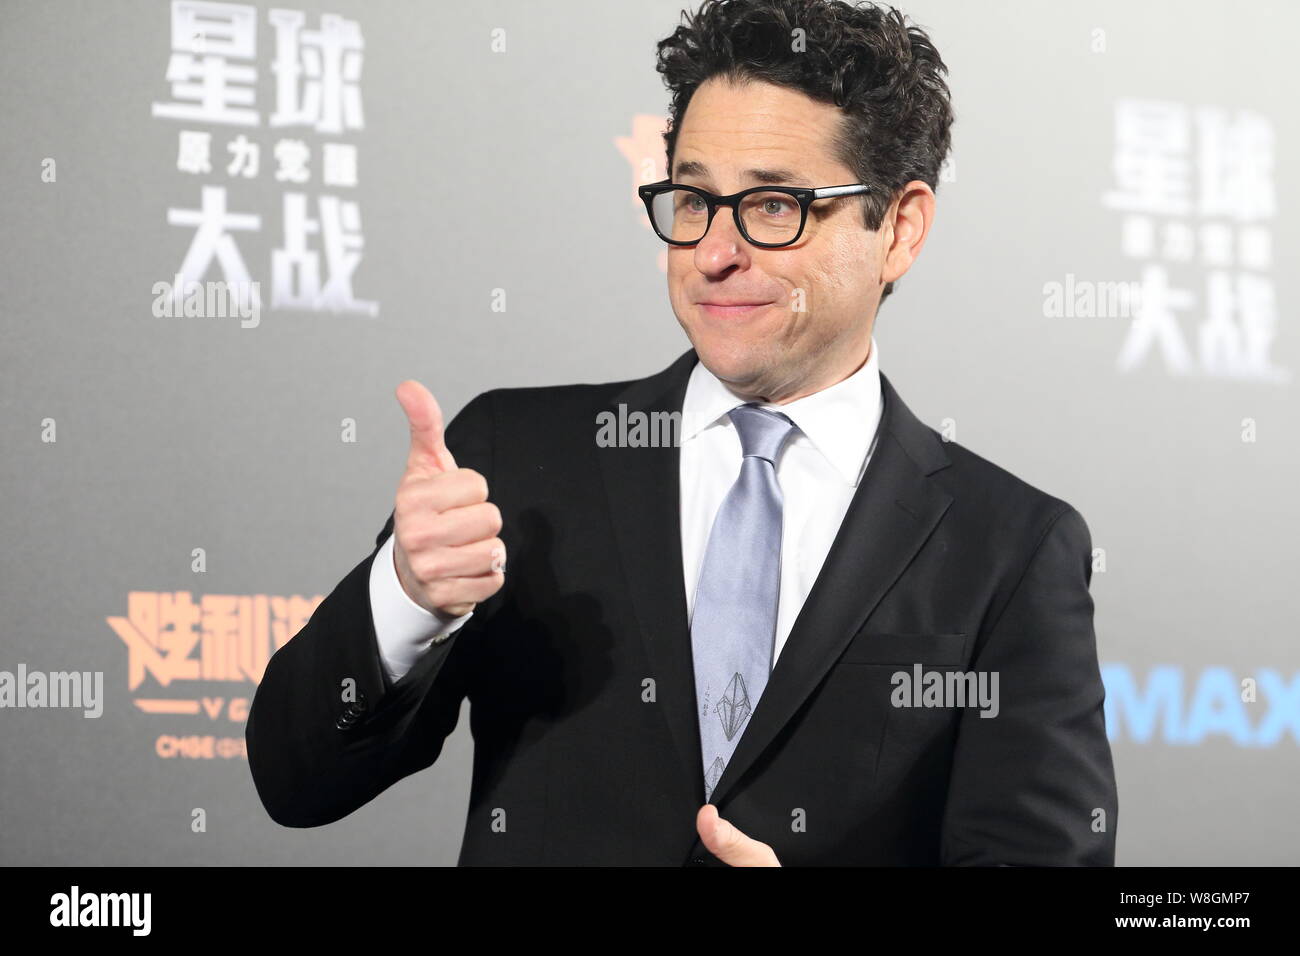 American director J. J. Abrams poses during a premiere for his movie 'Star Wars: The Force Awakens' in Shanghai, China, 27 December 2015. Stock Photo